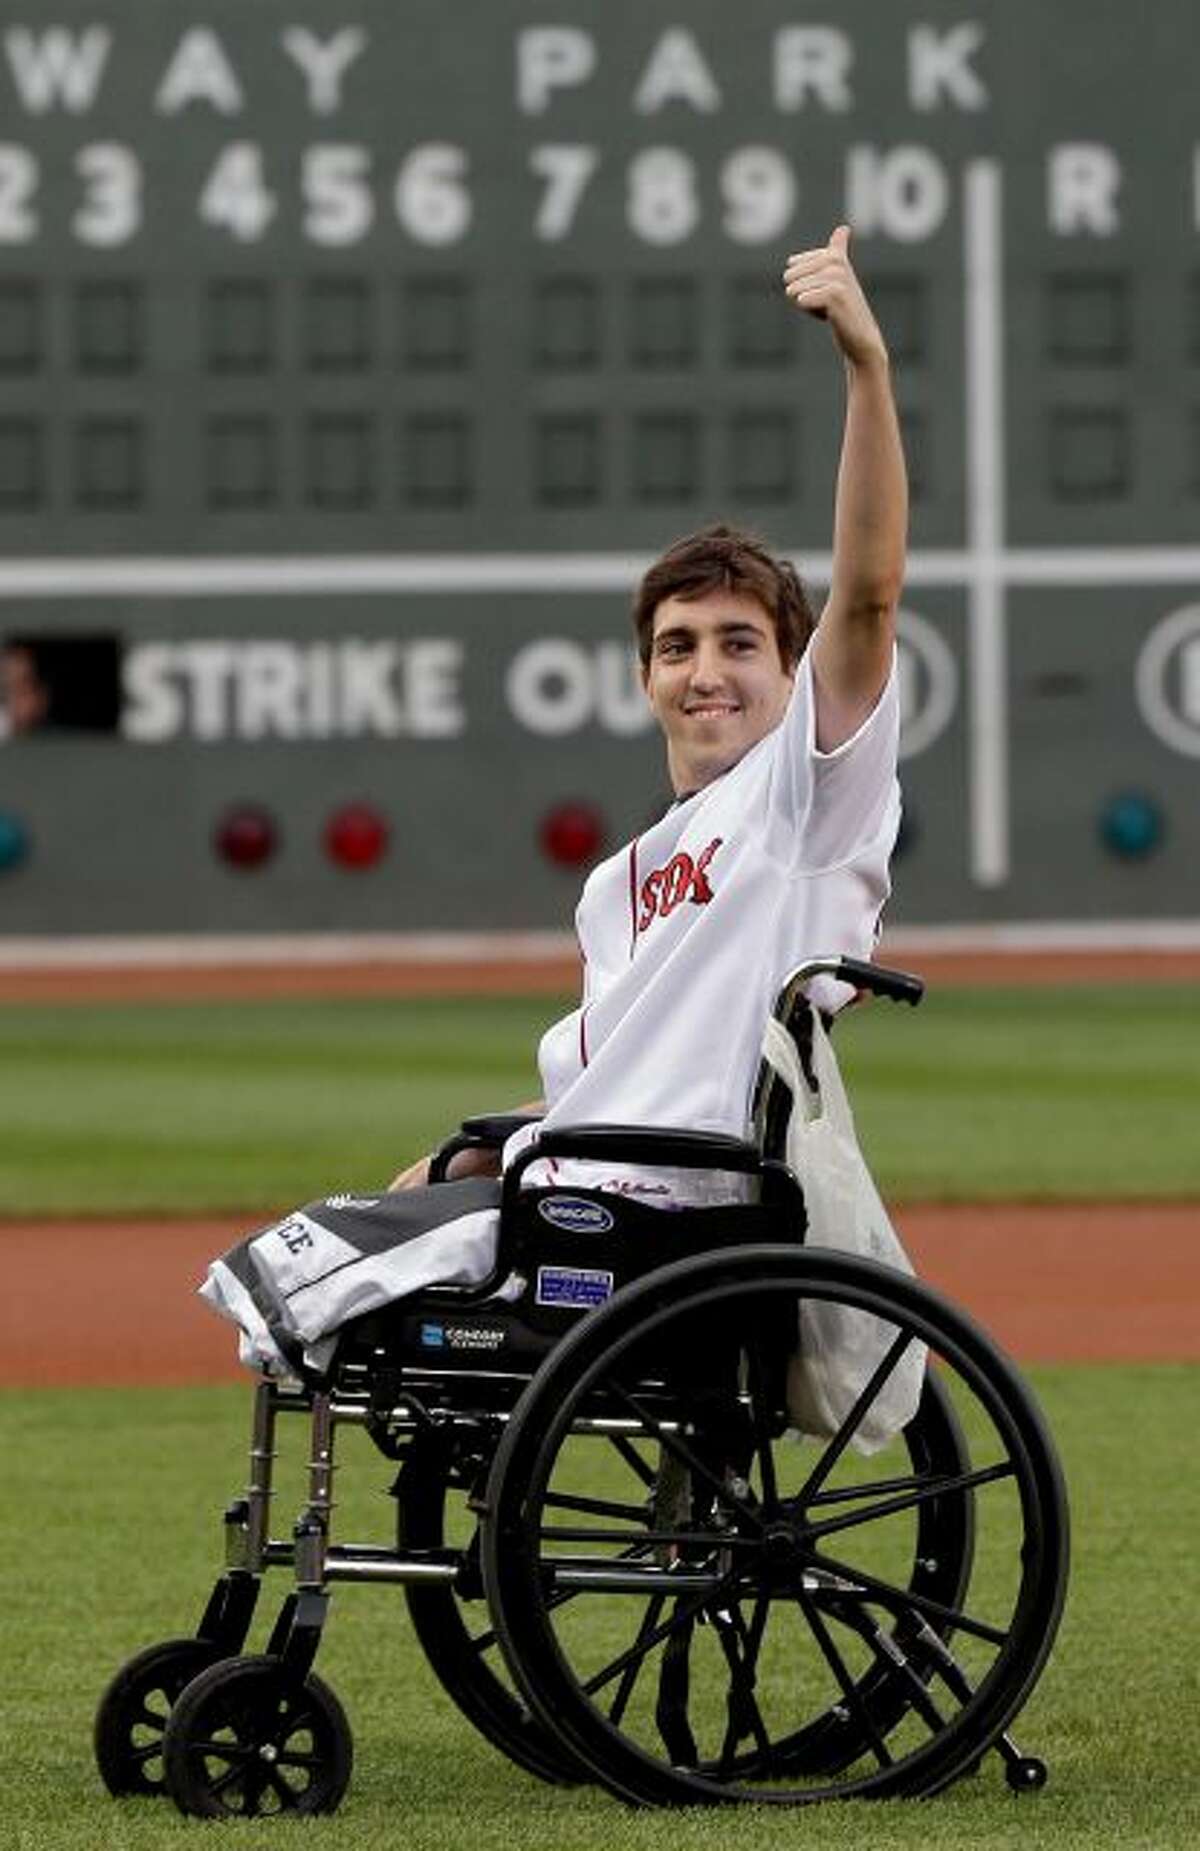 This May 28, 2013 file photo, Boston Marathon bombing survivor Jeff Bauman acknowledges cheering fans before throwing out a ceremonial first pitch at Fenway Park prior to a baseball between the Boston Red Sox and the Philadelphia Phillies in Boston. Bauman, who lost both legs in the Boston Marathon bombings, then helped authorities identify the suspects, is engaged and an expectant father. Bauman and his fiancé, Erin Hurley, tell The Associated Press that the baby is due July 14. They...